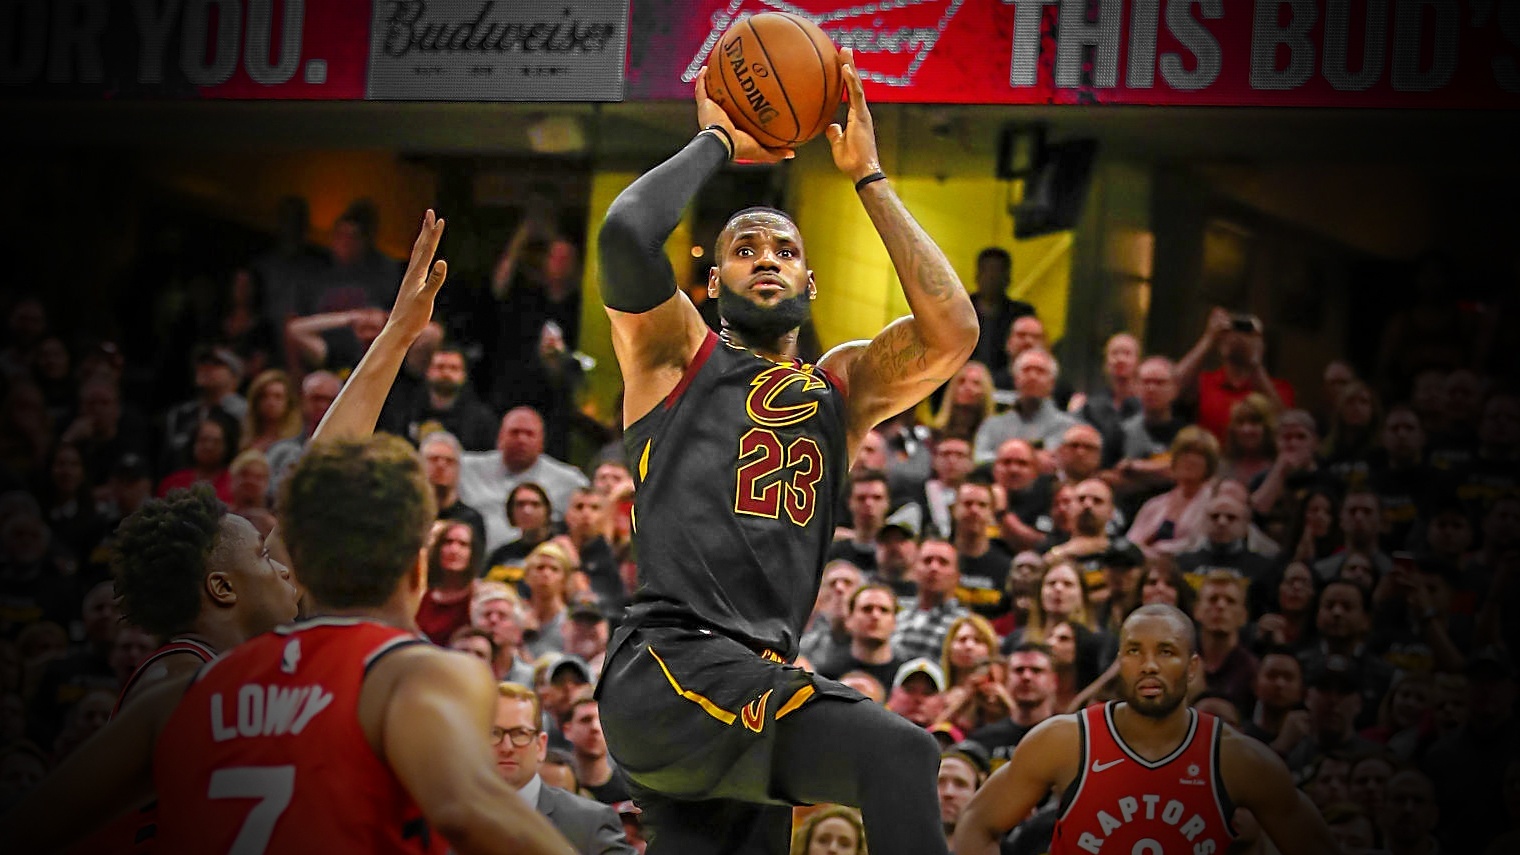 The King of Clutch; LeBron is No. 1 in NBA playoff buzzer beaters